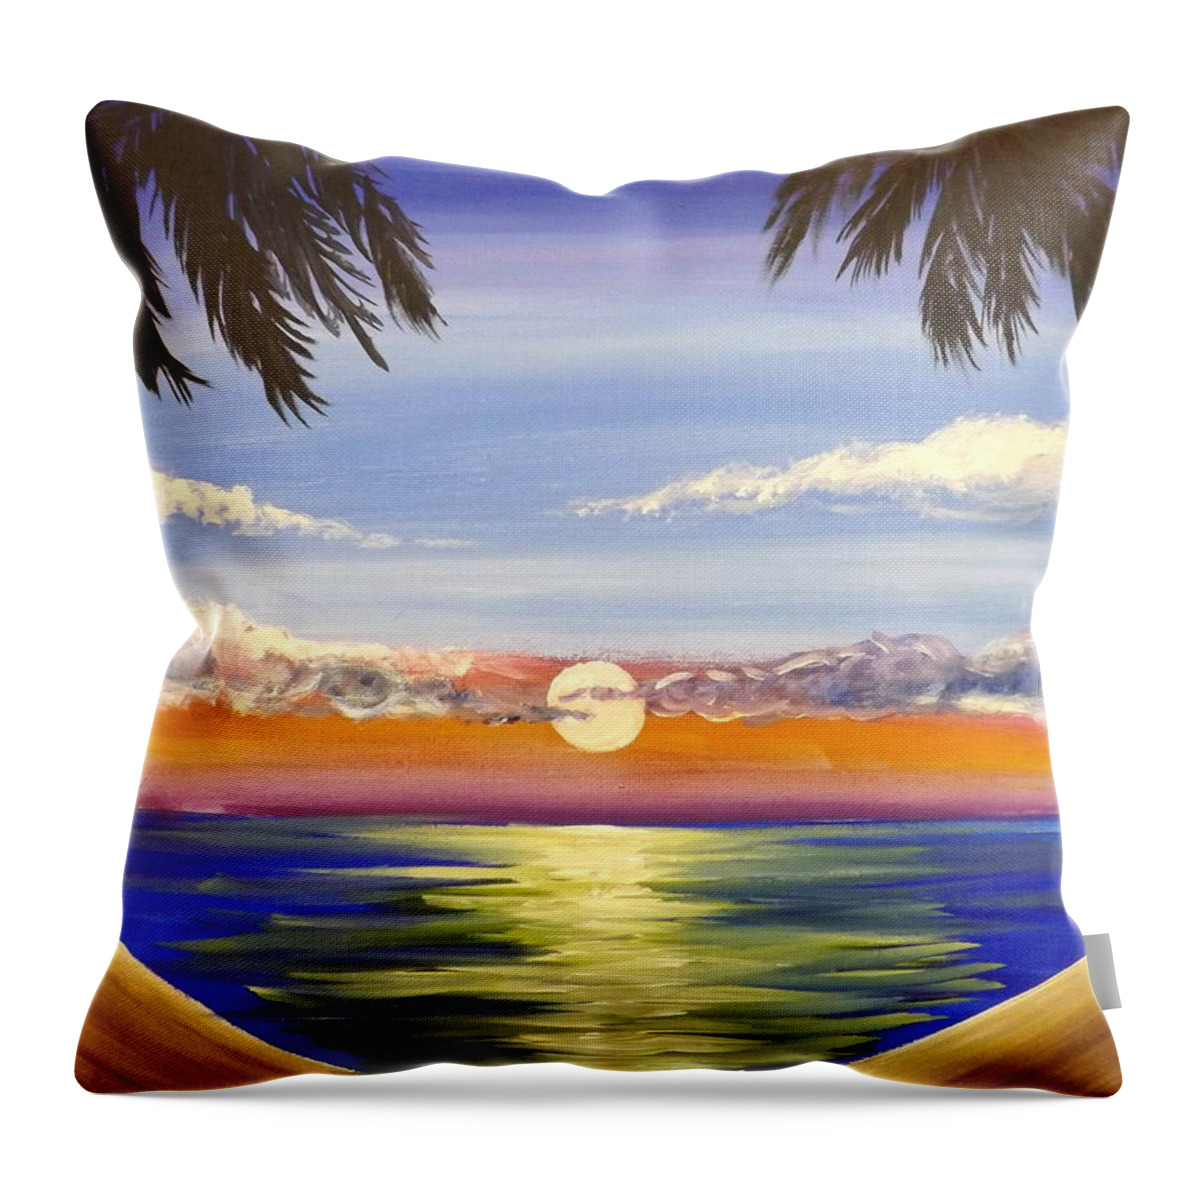 Twin Palms Throw Pillow featuring the painting Twin Palms by Darren Robinson